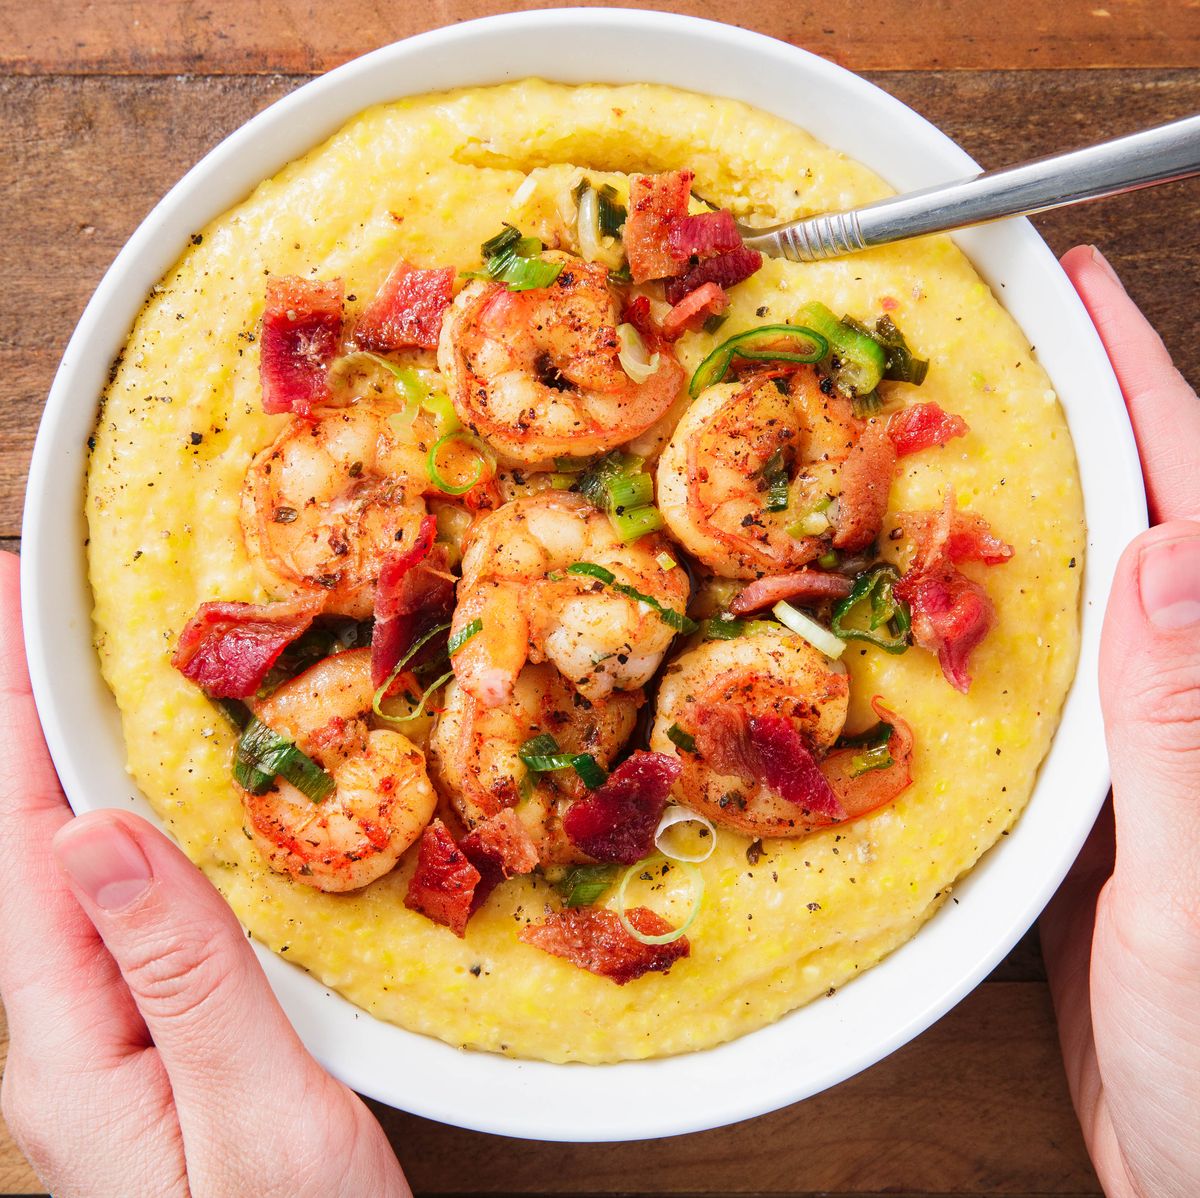 Top 2 Recipes For Shrimp And Grits